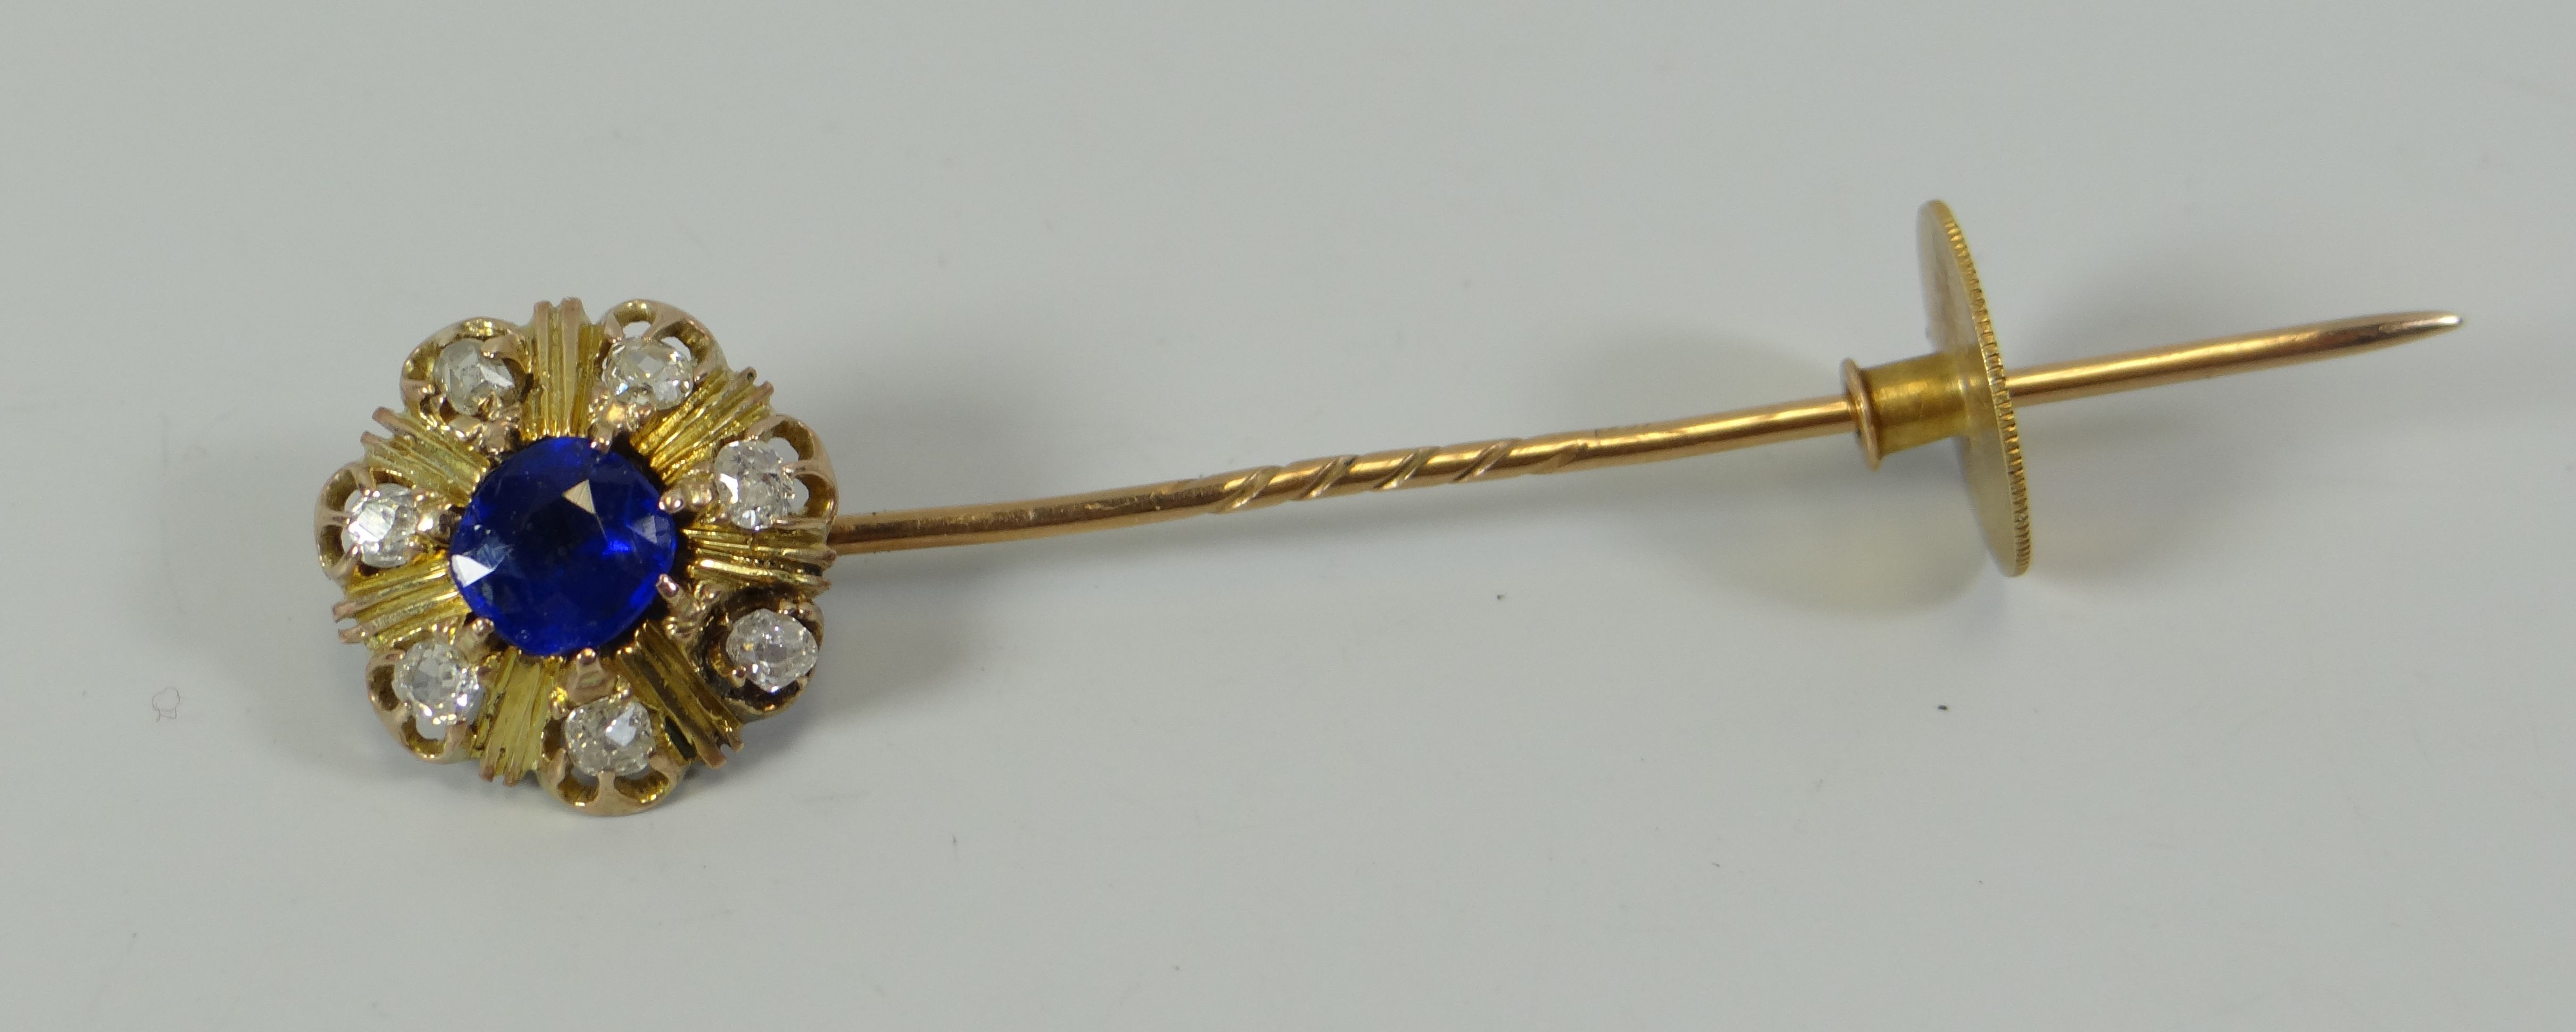 A BELIEVED 18CT GOLD DIAMOND & SAPPHIRE TIE-PIN composed of centre sapphire and seven outer old-mine